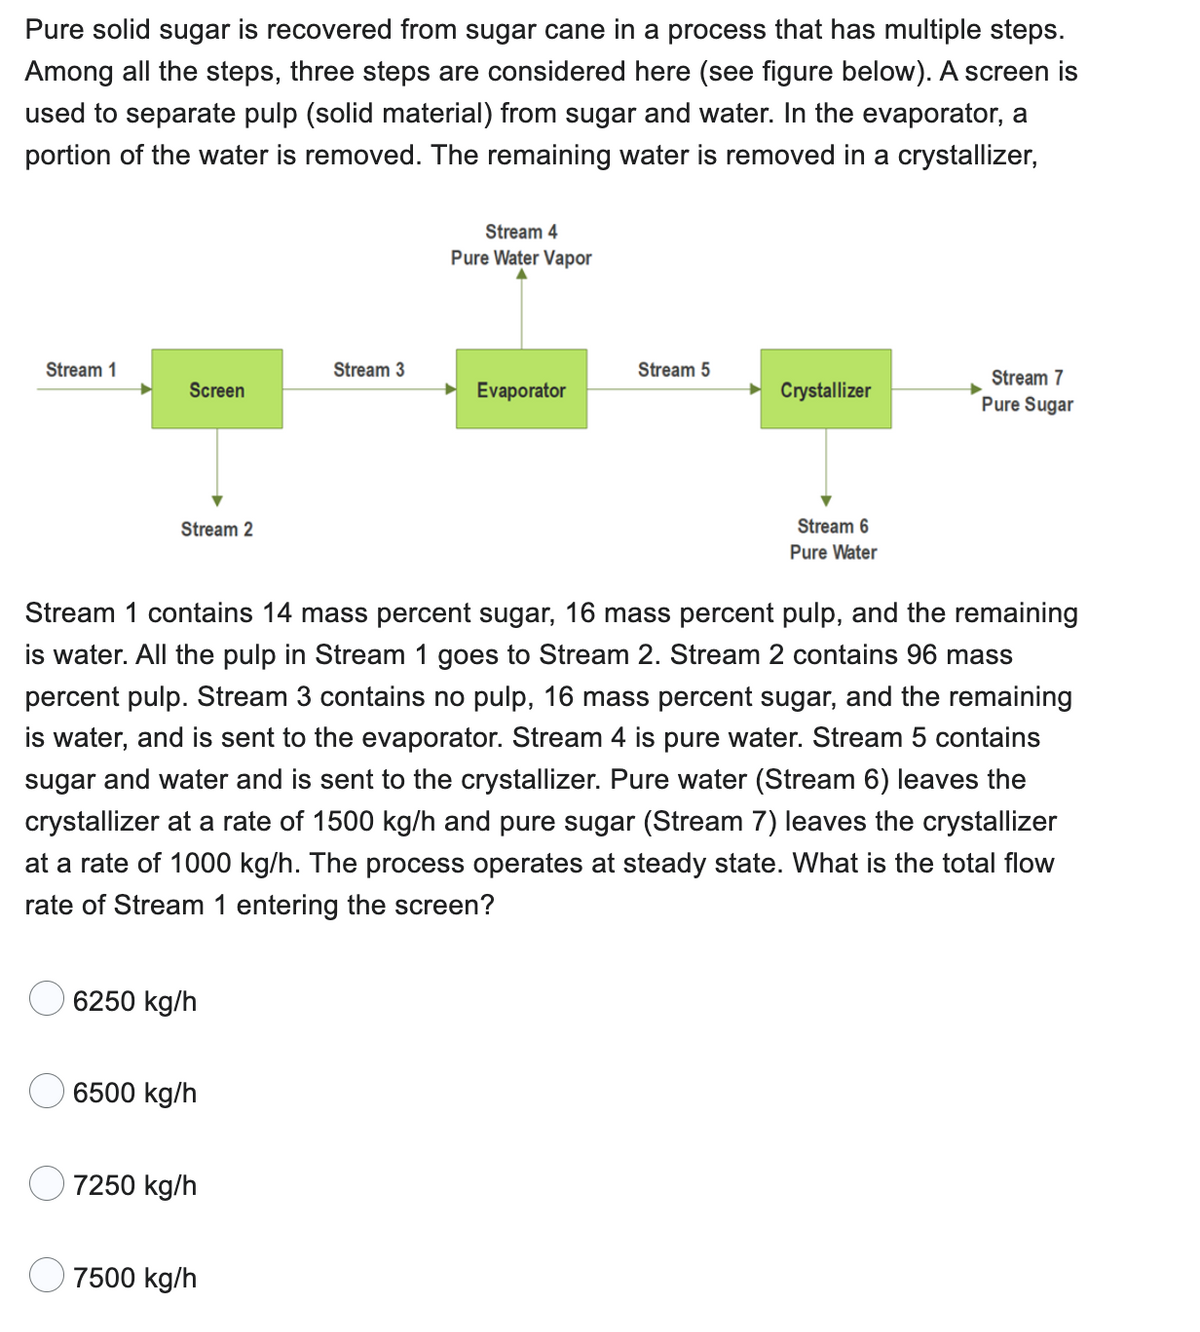 Pure solid sugar is recovered from sugar cane in a process that has multiple steps.
Among all the steps, three steps are considered here (see figure below). A screen is
used to separate pulp (solid material) from sugar and water. In the evaporator, a
portion of the water is removed. The remaining water is removed in a crystallizer,
Stream 1
Screen
Stream 2
6250 kg/h
6500 kg/h
7250 kg/h
Stream 3
7500 kg/h
Stream 4
Pure Water Vapor
Evaporator
Stream 5
Stream 1 contains 14 mass percent sugar, 16 mass percent pulp, and the remaining
is water. All the pulp in Stream 1 goes to Stream 2. Stream 2 contains 96 mass
percent pulp. Stream 3 contains no pulp, 16 mass percent sugar, and the remaining
is water, and is sent to the evaporator. Stream 4 is pure water. Stream 5 contains
sugar and water and is sent to the crystallizer. Pure water (Stream 6) leaves the
crystallizer at a rate of 1500 kg/h and pure sugar (Stream 7) leaves the crystallizer
at a rate of 1000 kg/h. The process operates at steady state. What is the total flow
rate of Stream 1 entering the screen?
Crystallizer
Stream 6
Pure Water
Stream 7
Pure Sugar